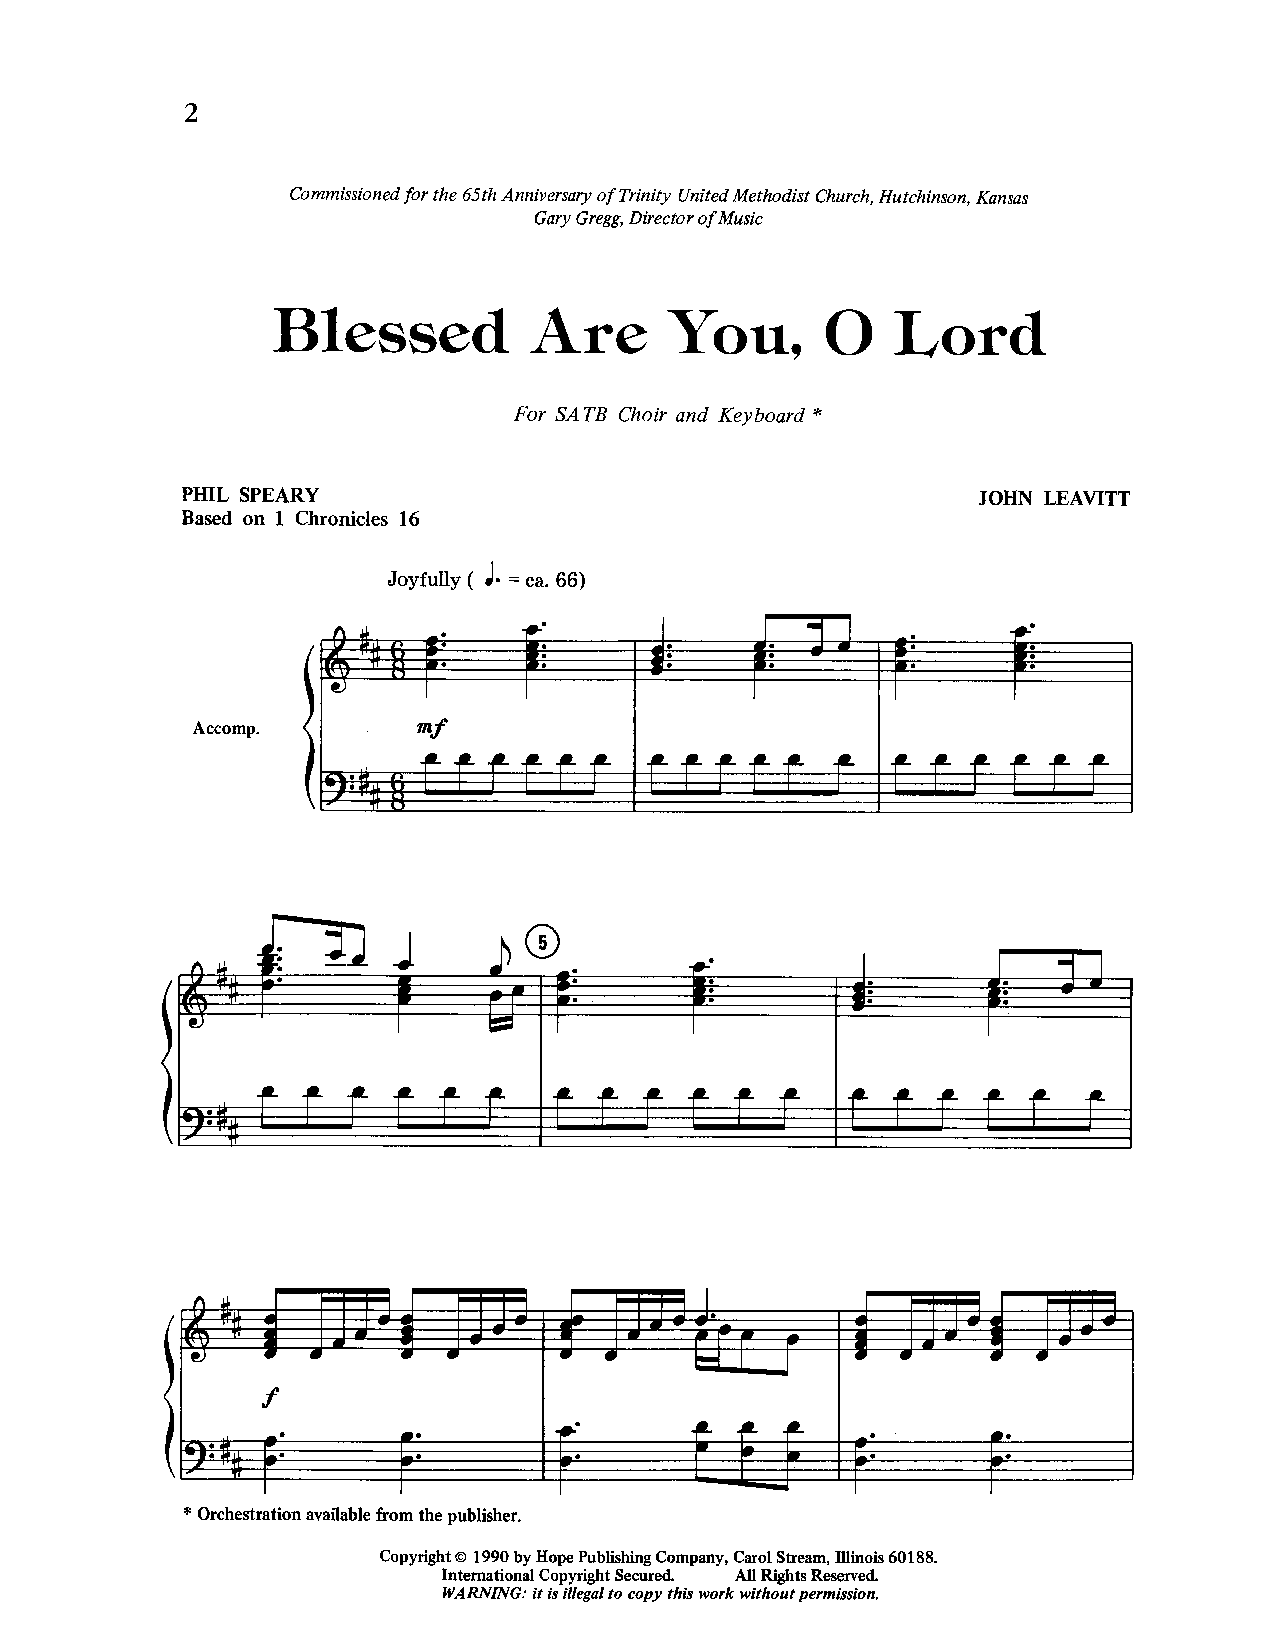 BLESSED ARE YOU O LORD